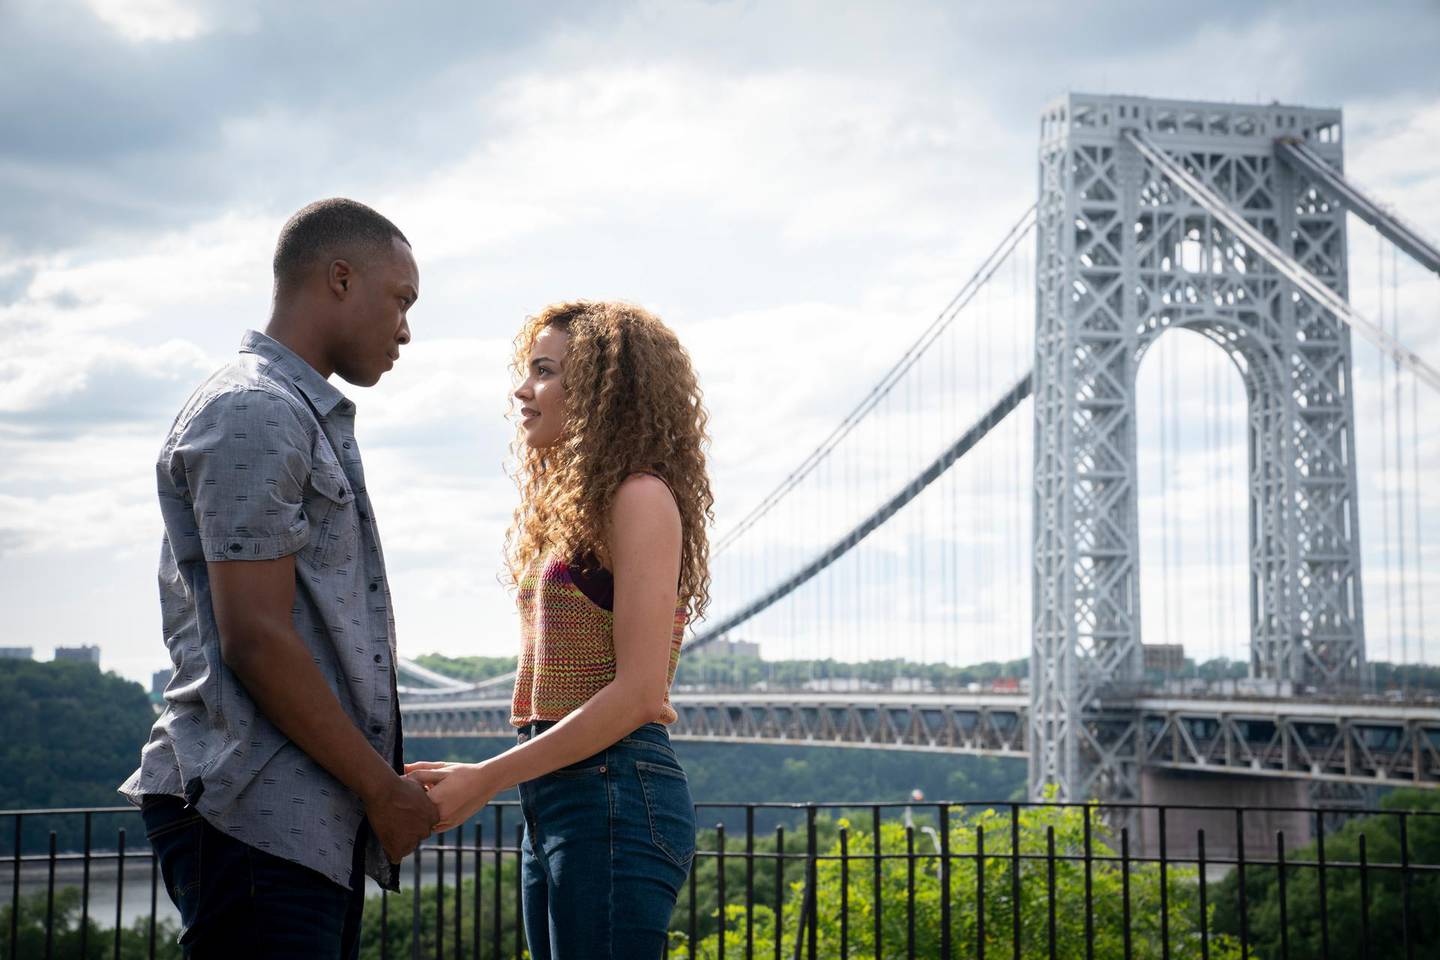 This image released by Warner Bros. Entertainment shows Corey Hawkins, left, and Leslie Grace in a scene from "In the Heights."   Every year, Hollywood inevitably comes under criticism for its lack of racial diversity.  It happened again with â€œIn the Heights,â€ a big-budget film based on the musical created by Lin-Manuel Miranda, which was called out this week for its dearth of dark-skinned, Black Latinos in leading roles. Â  (Macall Polay/Warner Bros. Entertainment via AP)